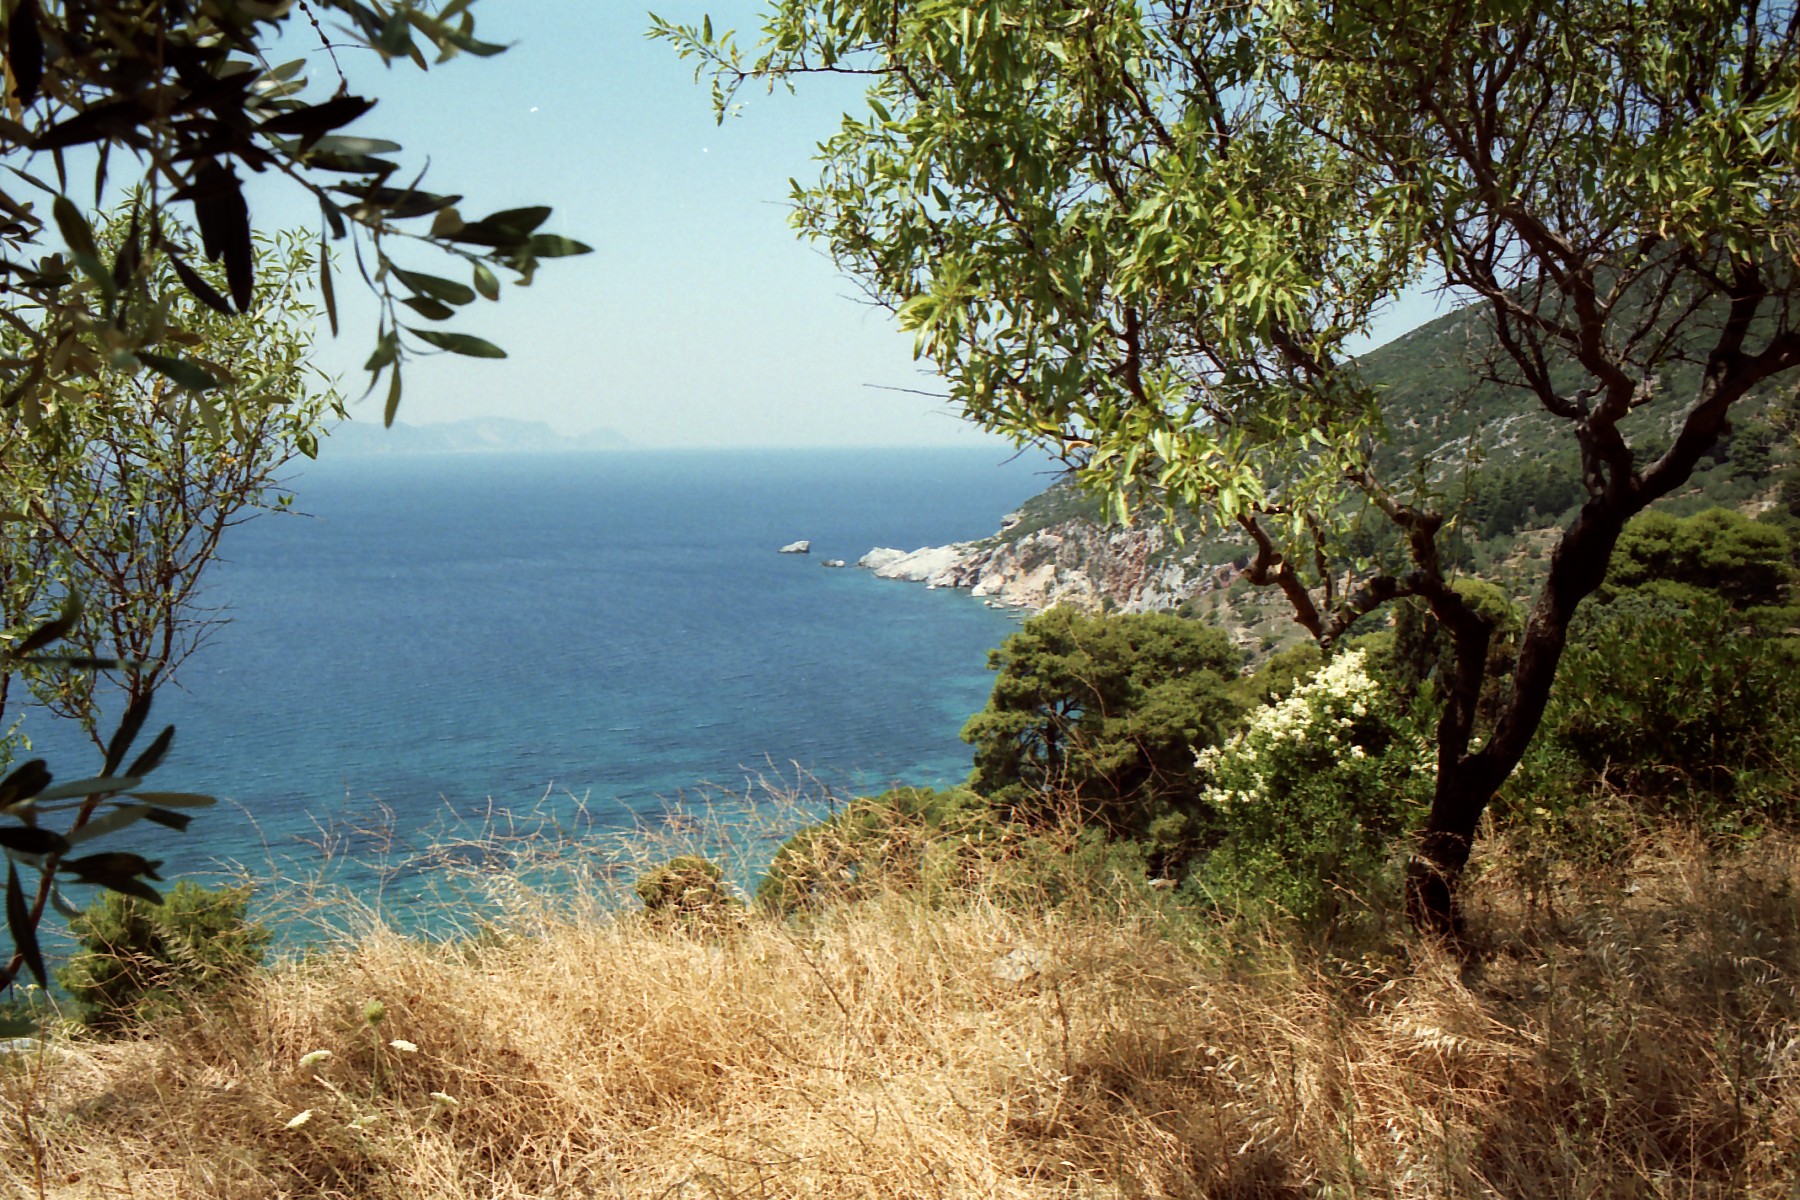 a view of the water from a hilltop